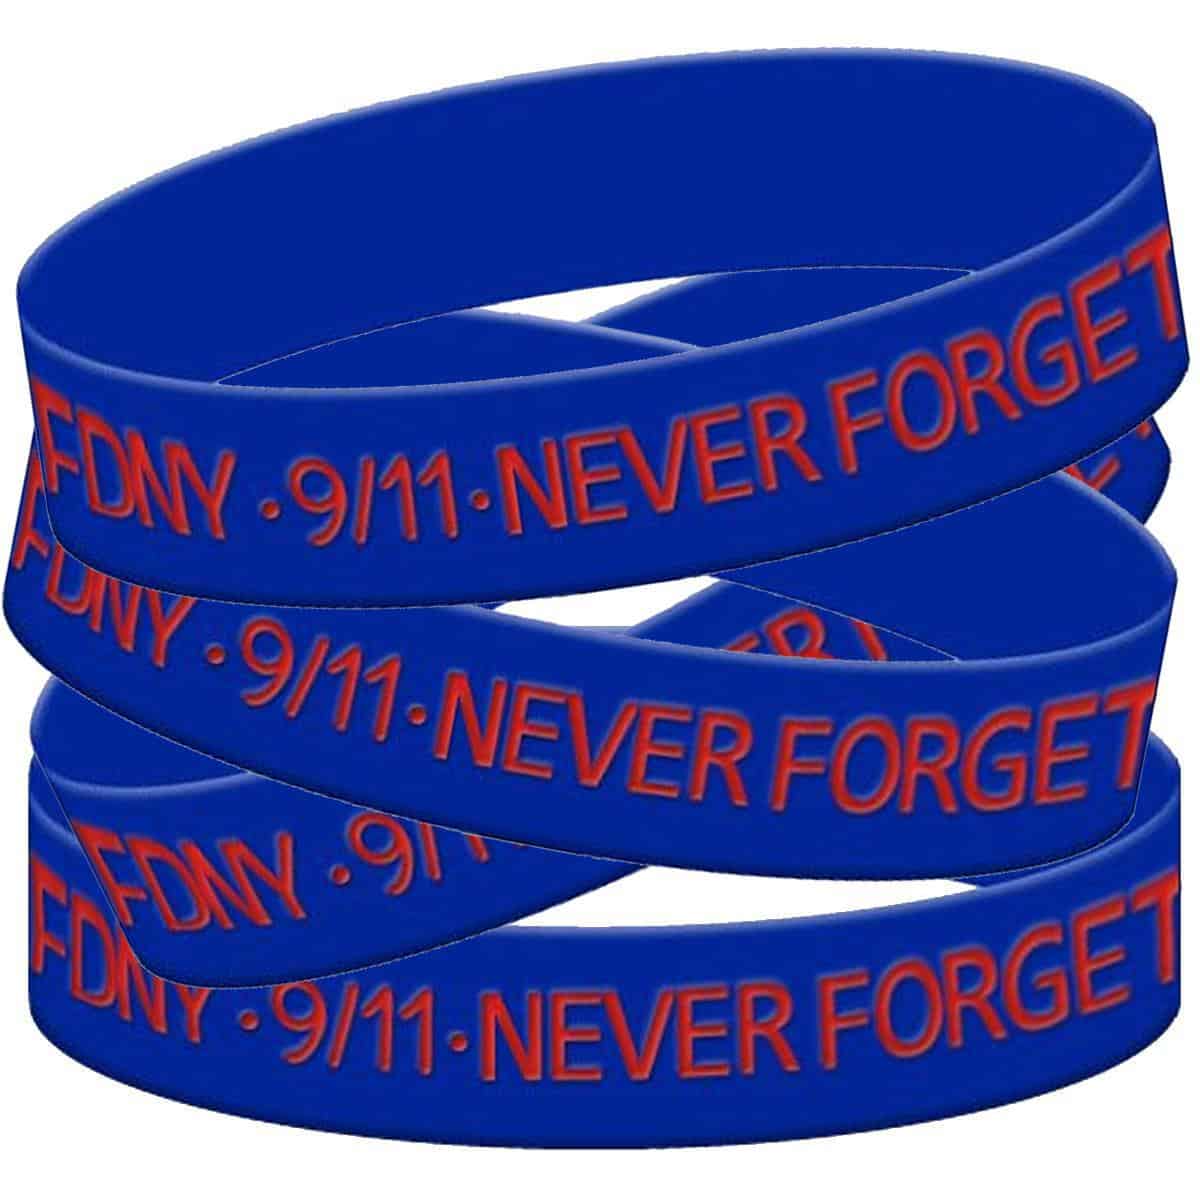 Firefighters Memorial Day wristband – Fire Brigades Union